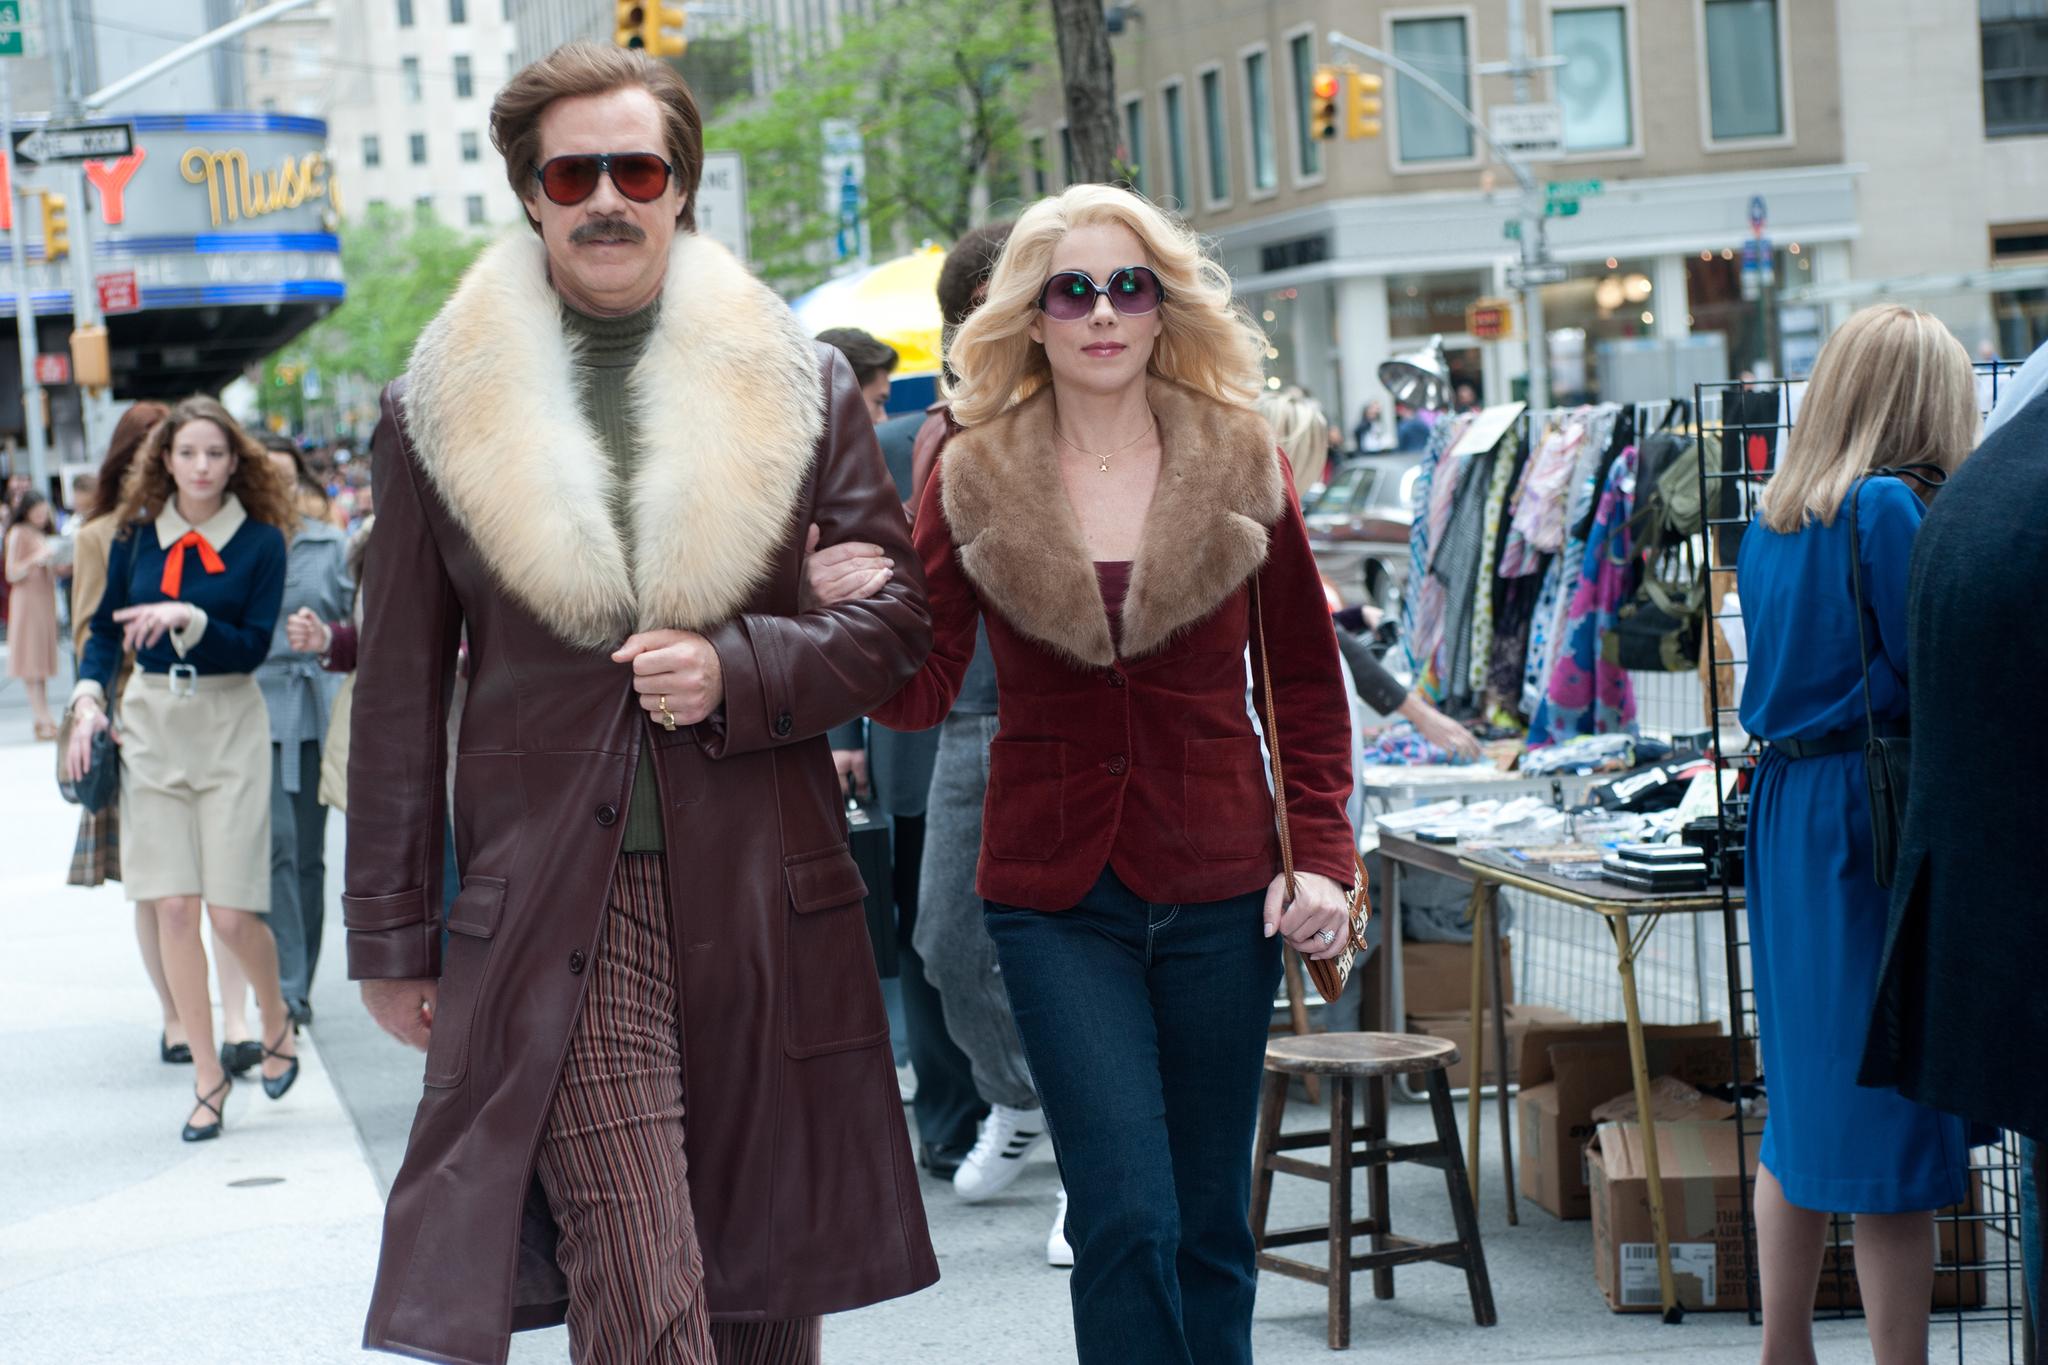 Anchorman 2 The Legend Continues movie g wallpaper 2048x1365